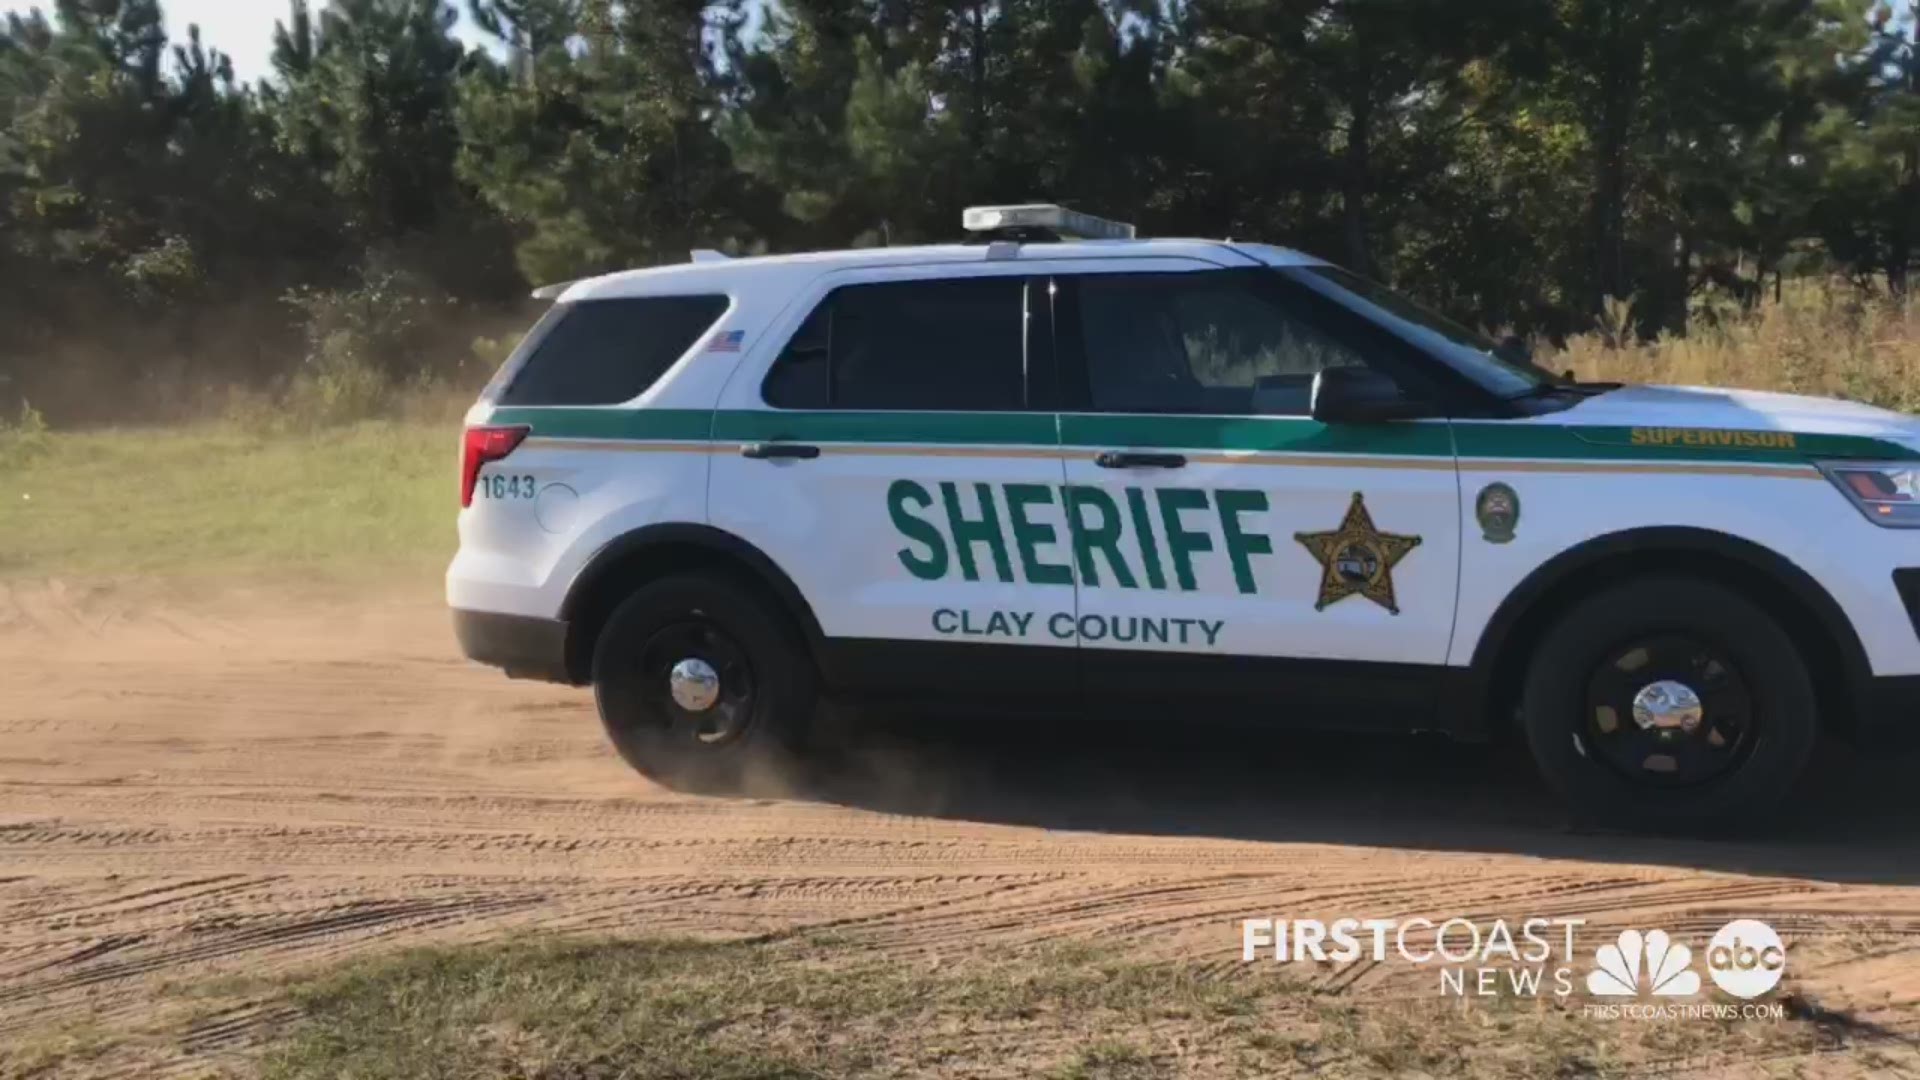 The Florida Highway Patrol has confirmed the single occupant of a small plane is dead after the plane crashed into a power line in Clay County on Thursday.